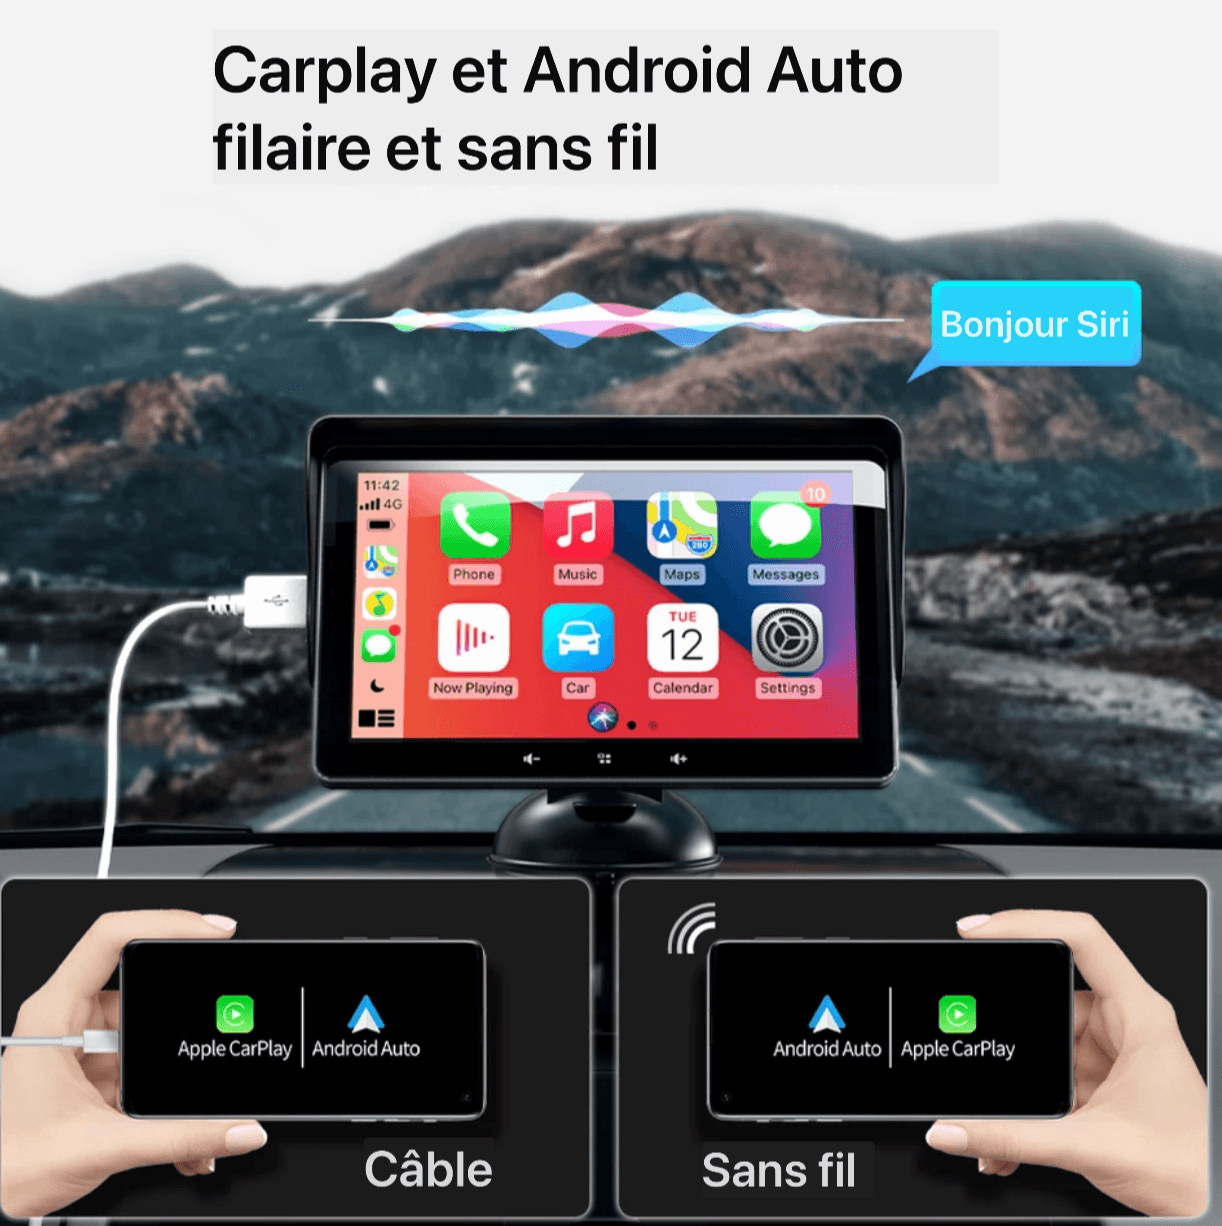 DriveConnect UNIVERSEL CarPlay | Android (Waze,Musique,Message..) - LaFrTouch